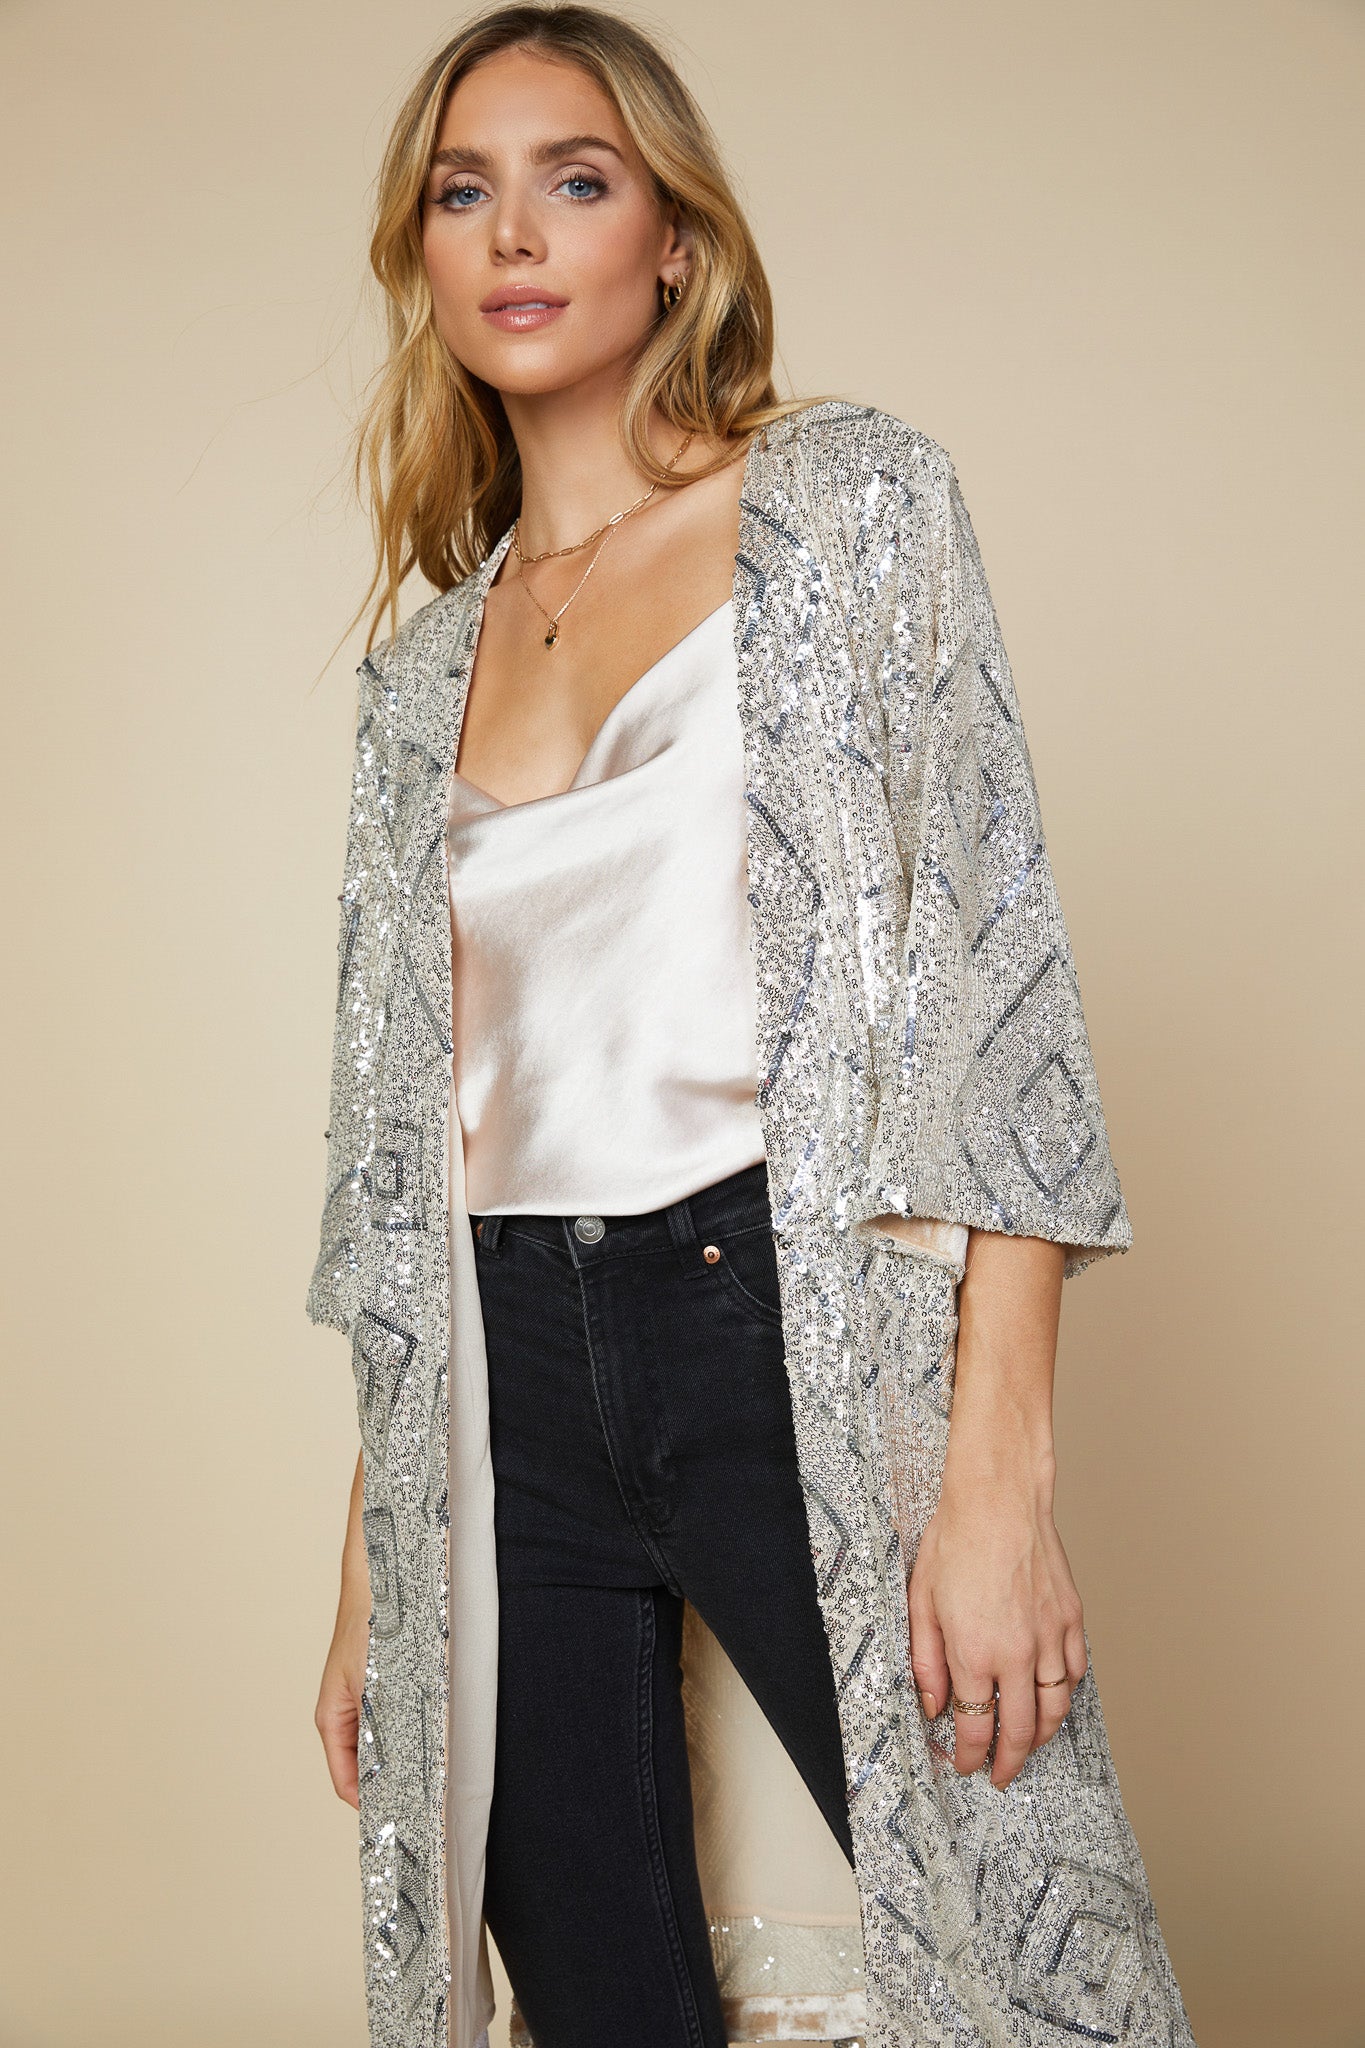 Belted Sequin Duster